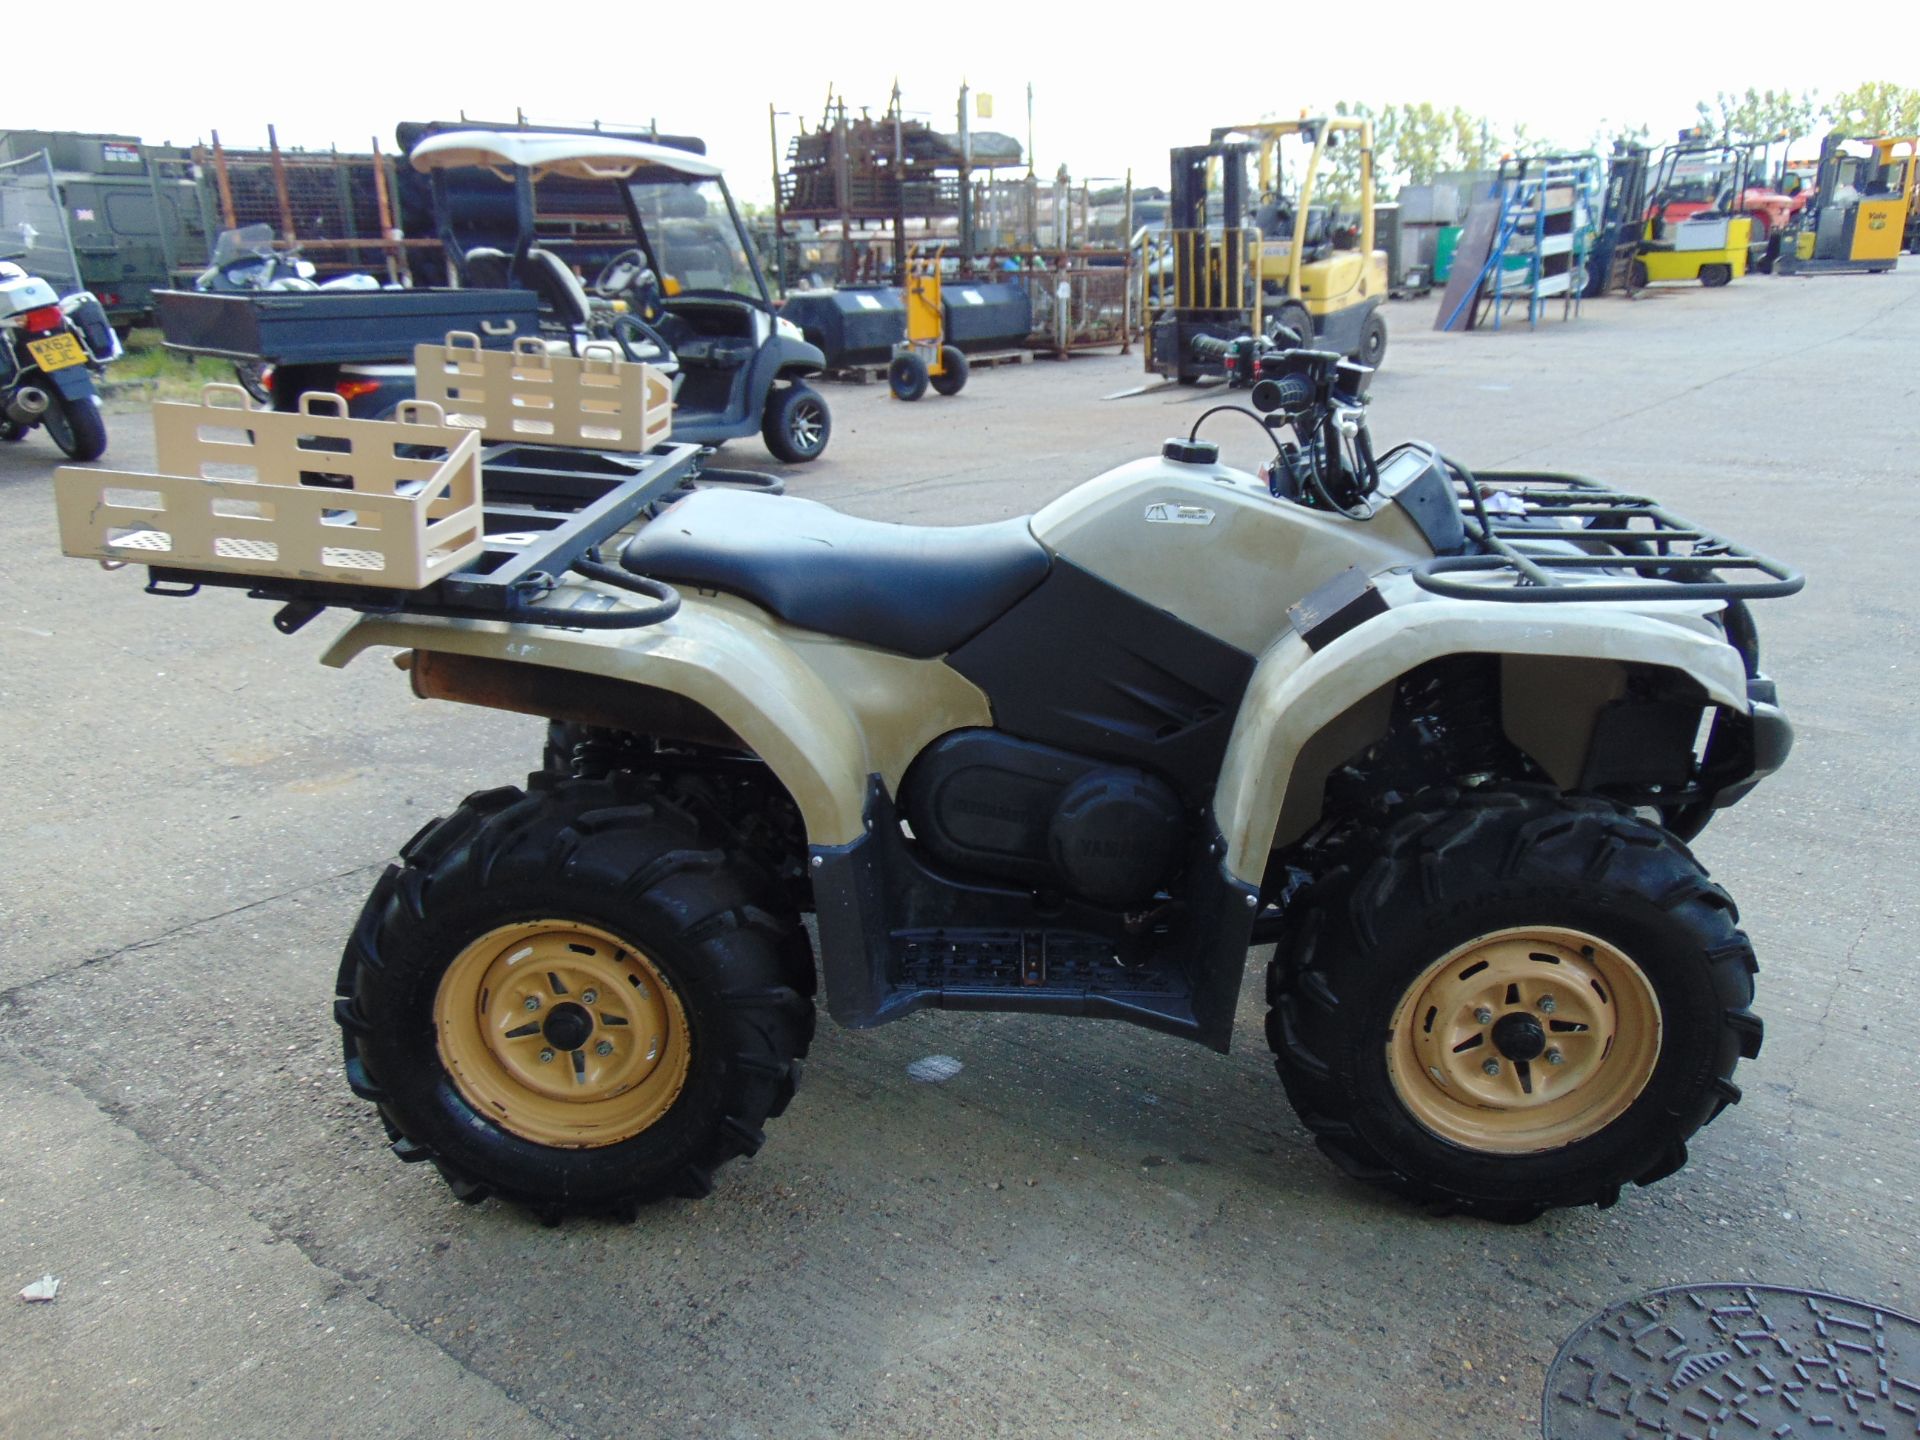 Military Specification Yamaha Grizzly 450 4 x 4 ATV Quad Bike Showing 223 hrs - Image 6 of 23